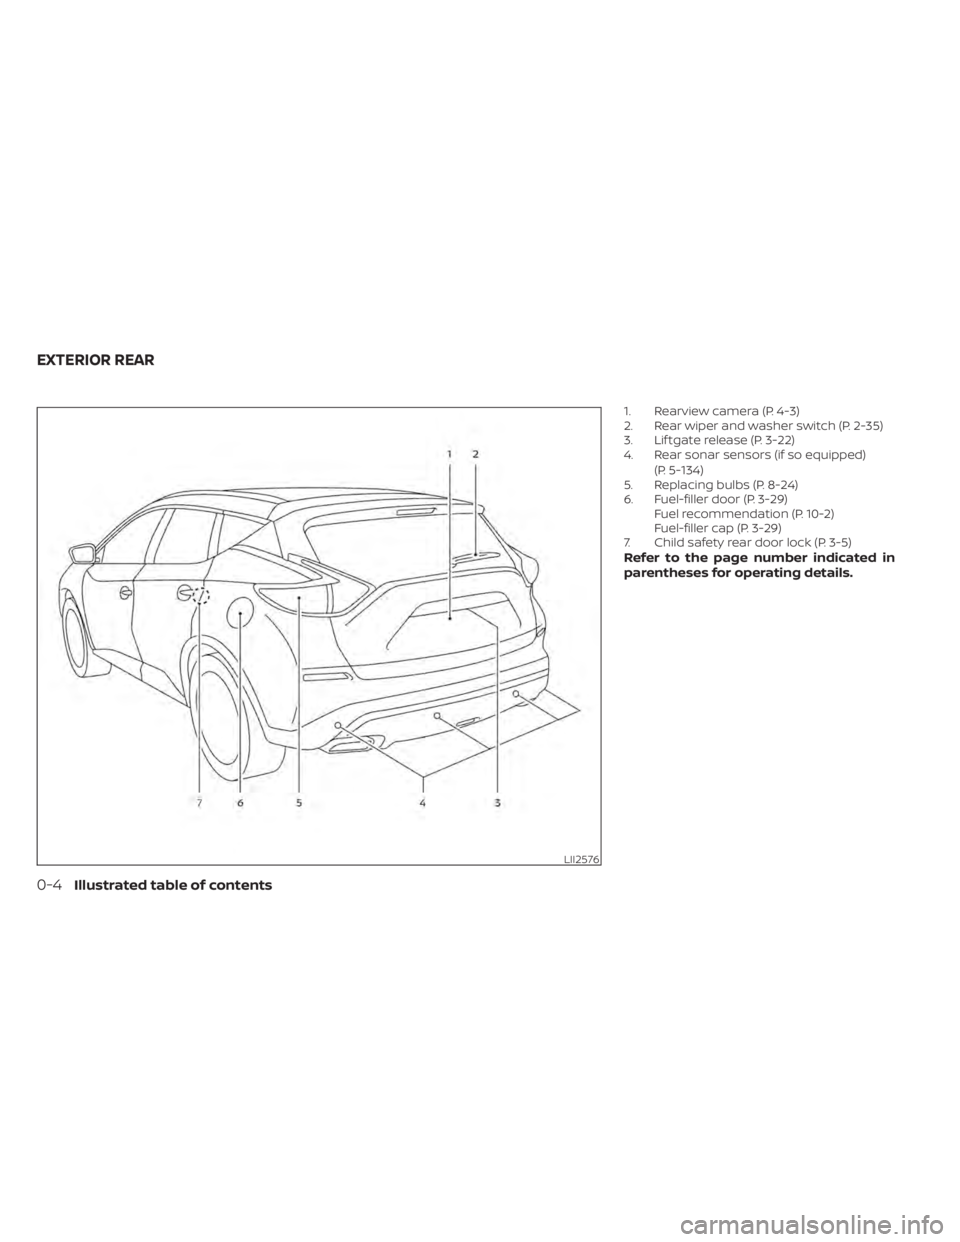 NISSAN MURANO 2020  Owner´s Manual 1. Rearview camera (P. 4-3)
2. Rear wiper and washer switch (P. 2-35)
3. Lif tgate release (P. 3-22)
4. Rear sonar sensors (if so equipped)(P. 5-134)
5. Replacing bulbs (P. 8-24)
6. Fuel-filler door (